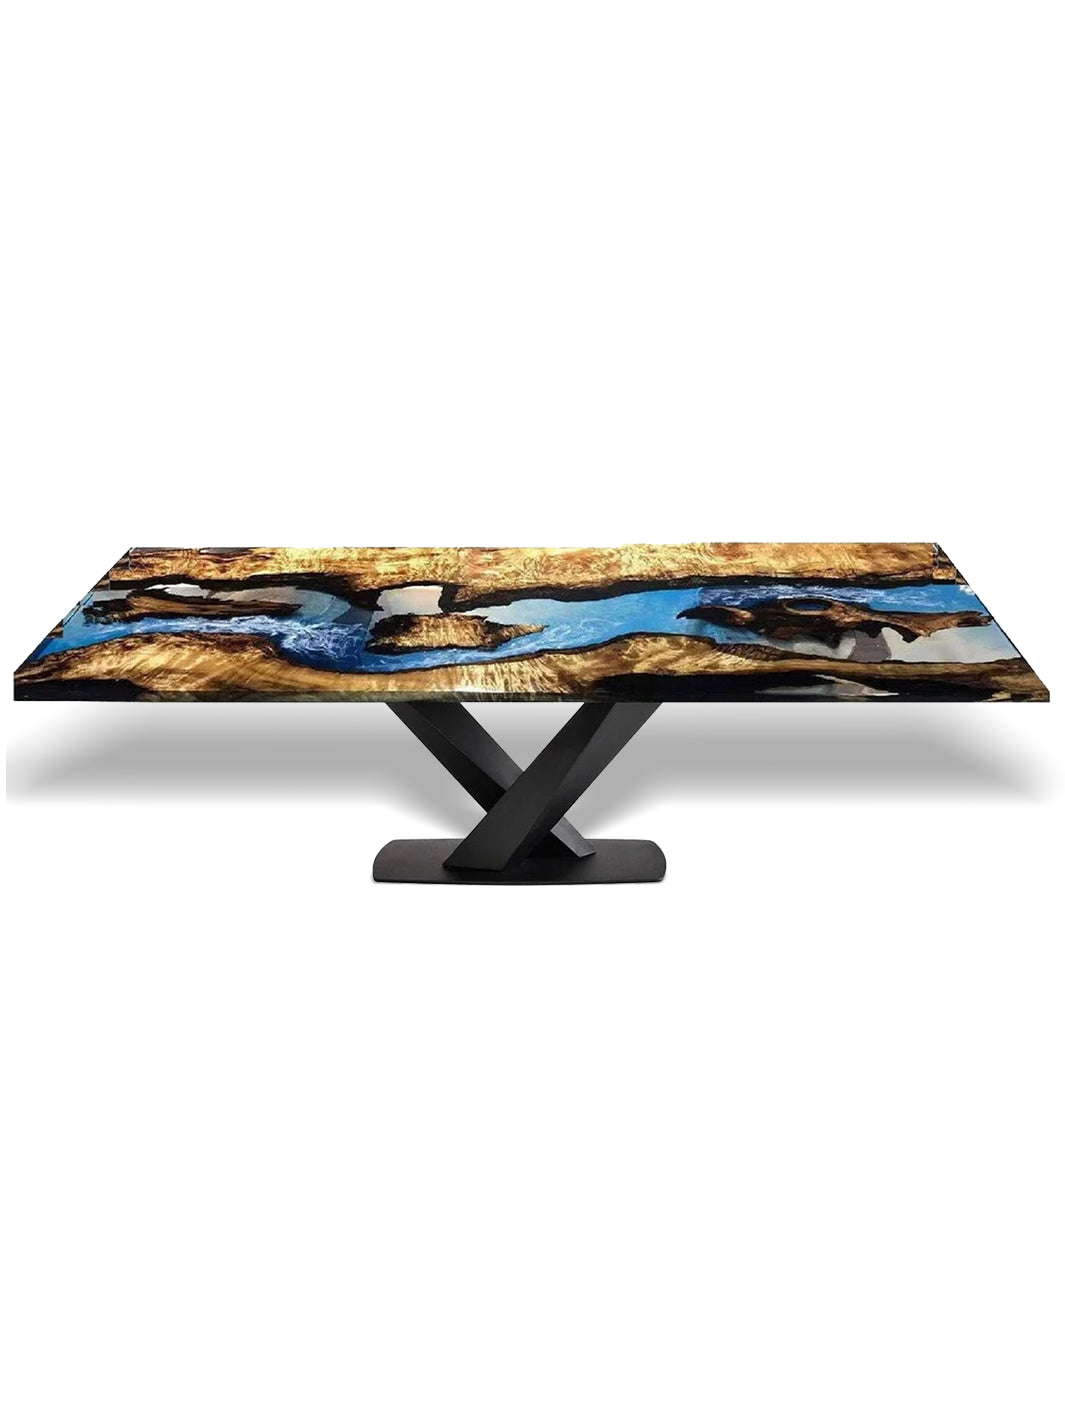 Handcrafted River Beach Epoxy Resin Wooden Coffee Table| 150x60cm Made 4 Decor Tables MDR0015